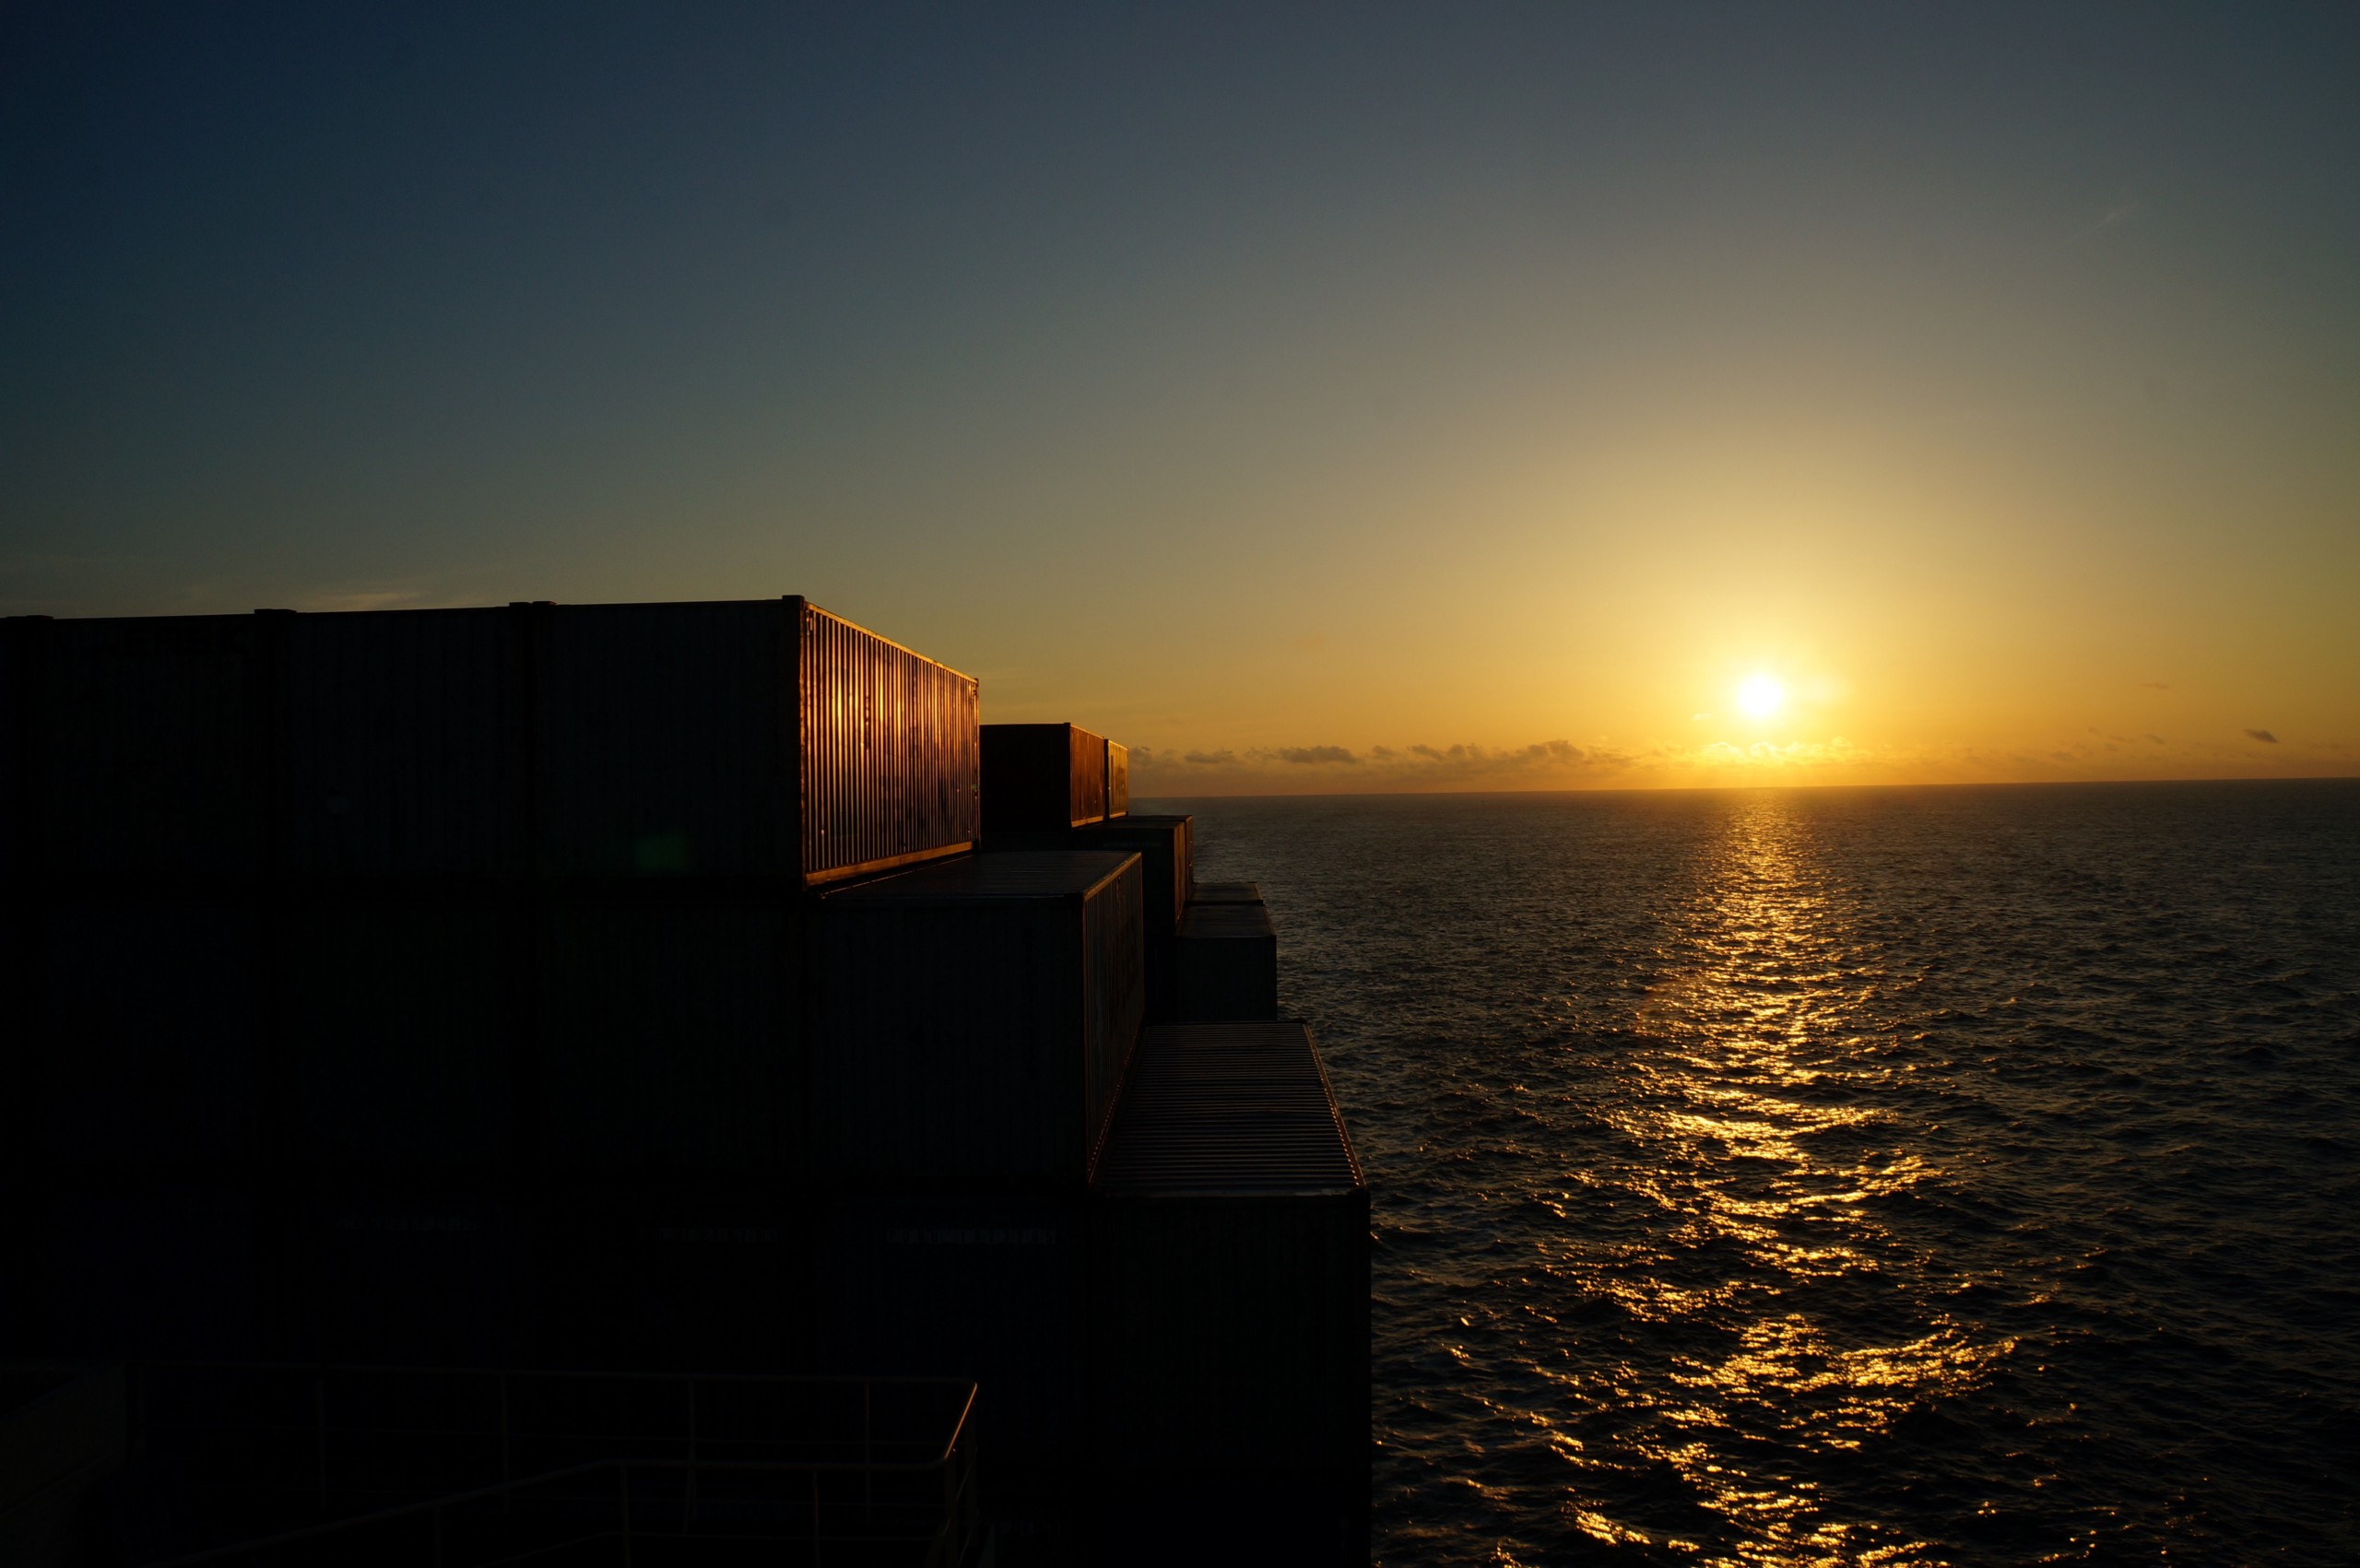 A container ship at sea, with the sunset in the distance.